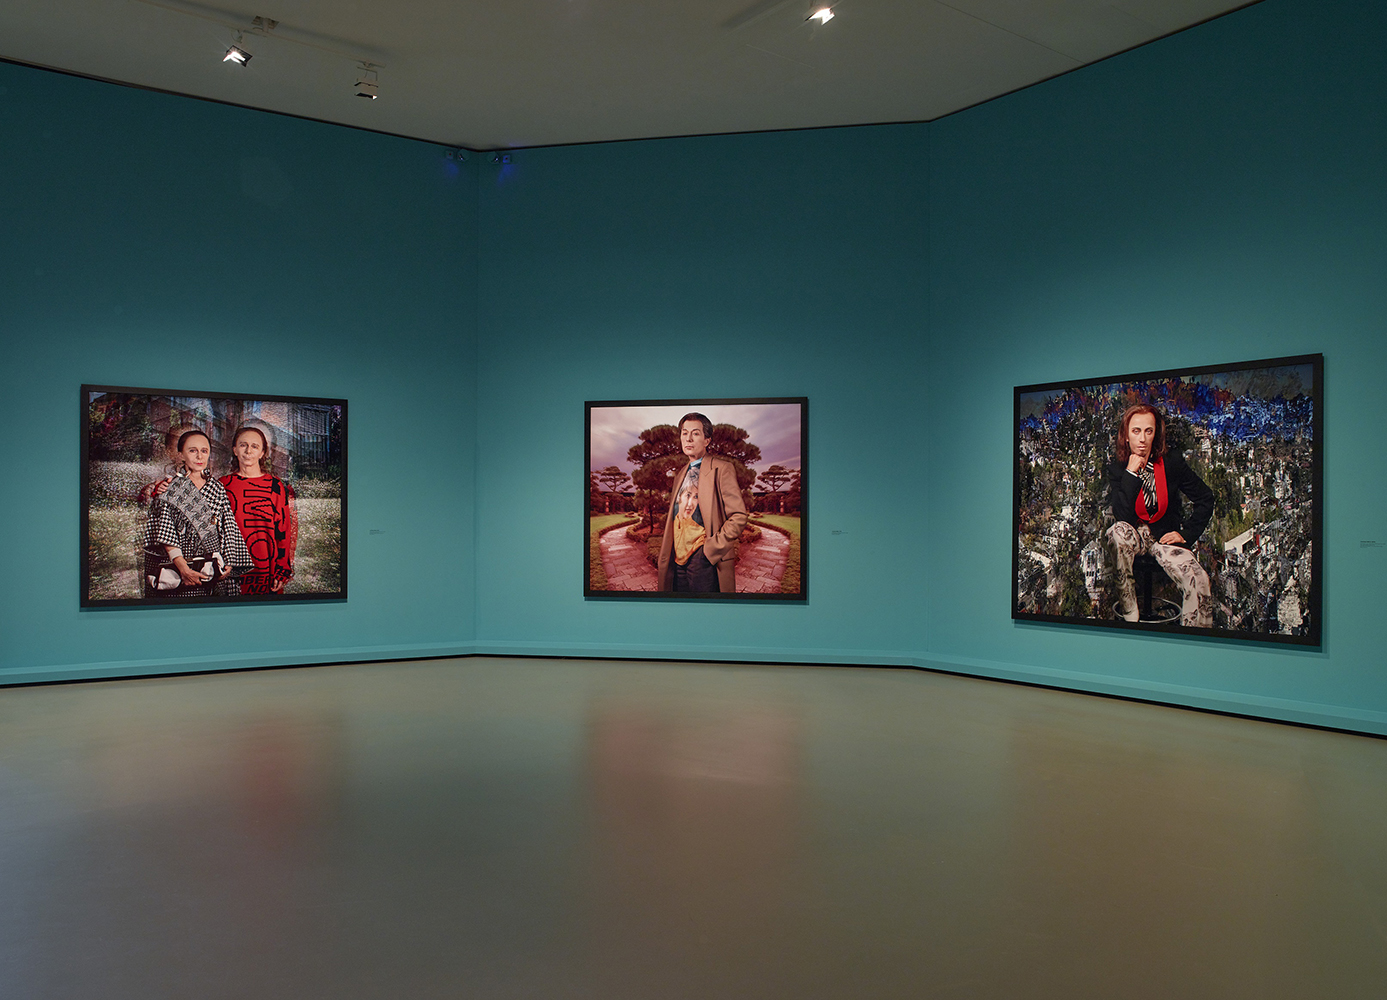 Cindy Sherman's 2020 Show At Fondation Louis Vuitton Is a Must-See